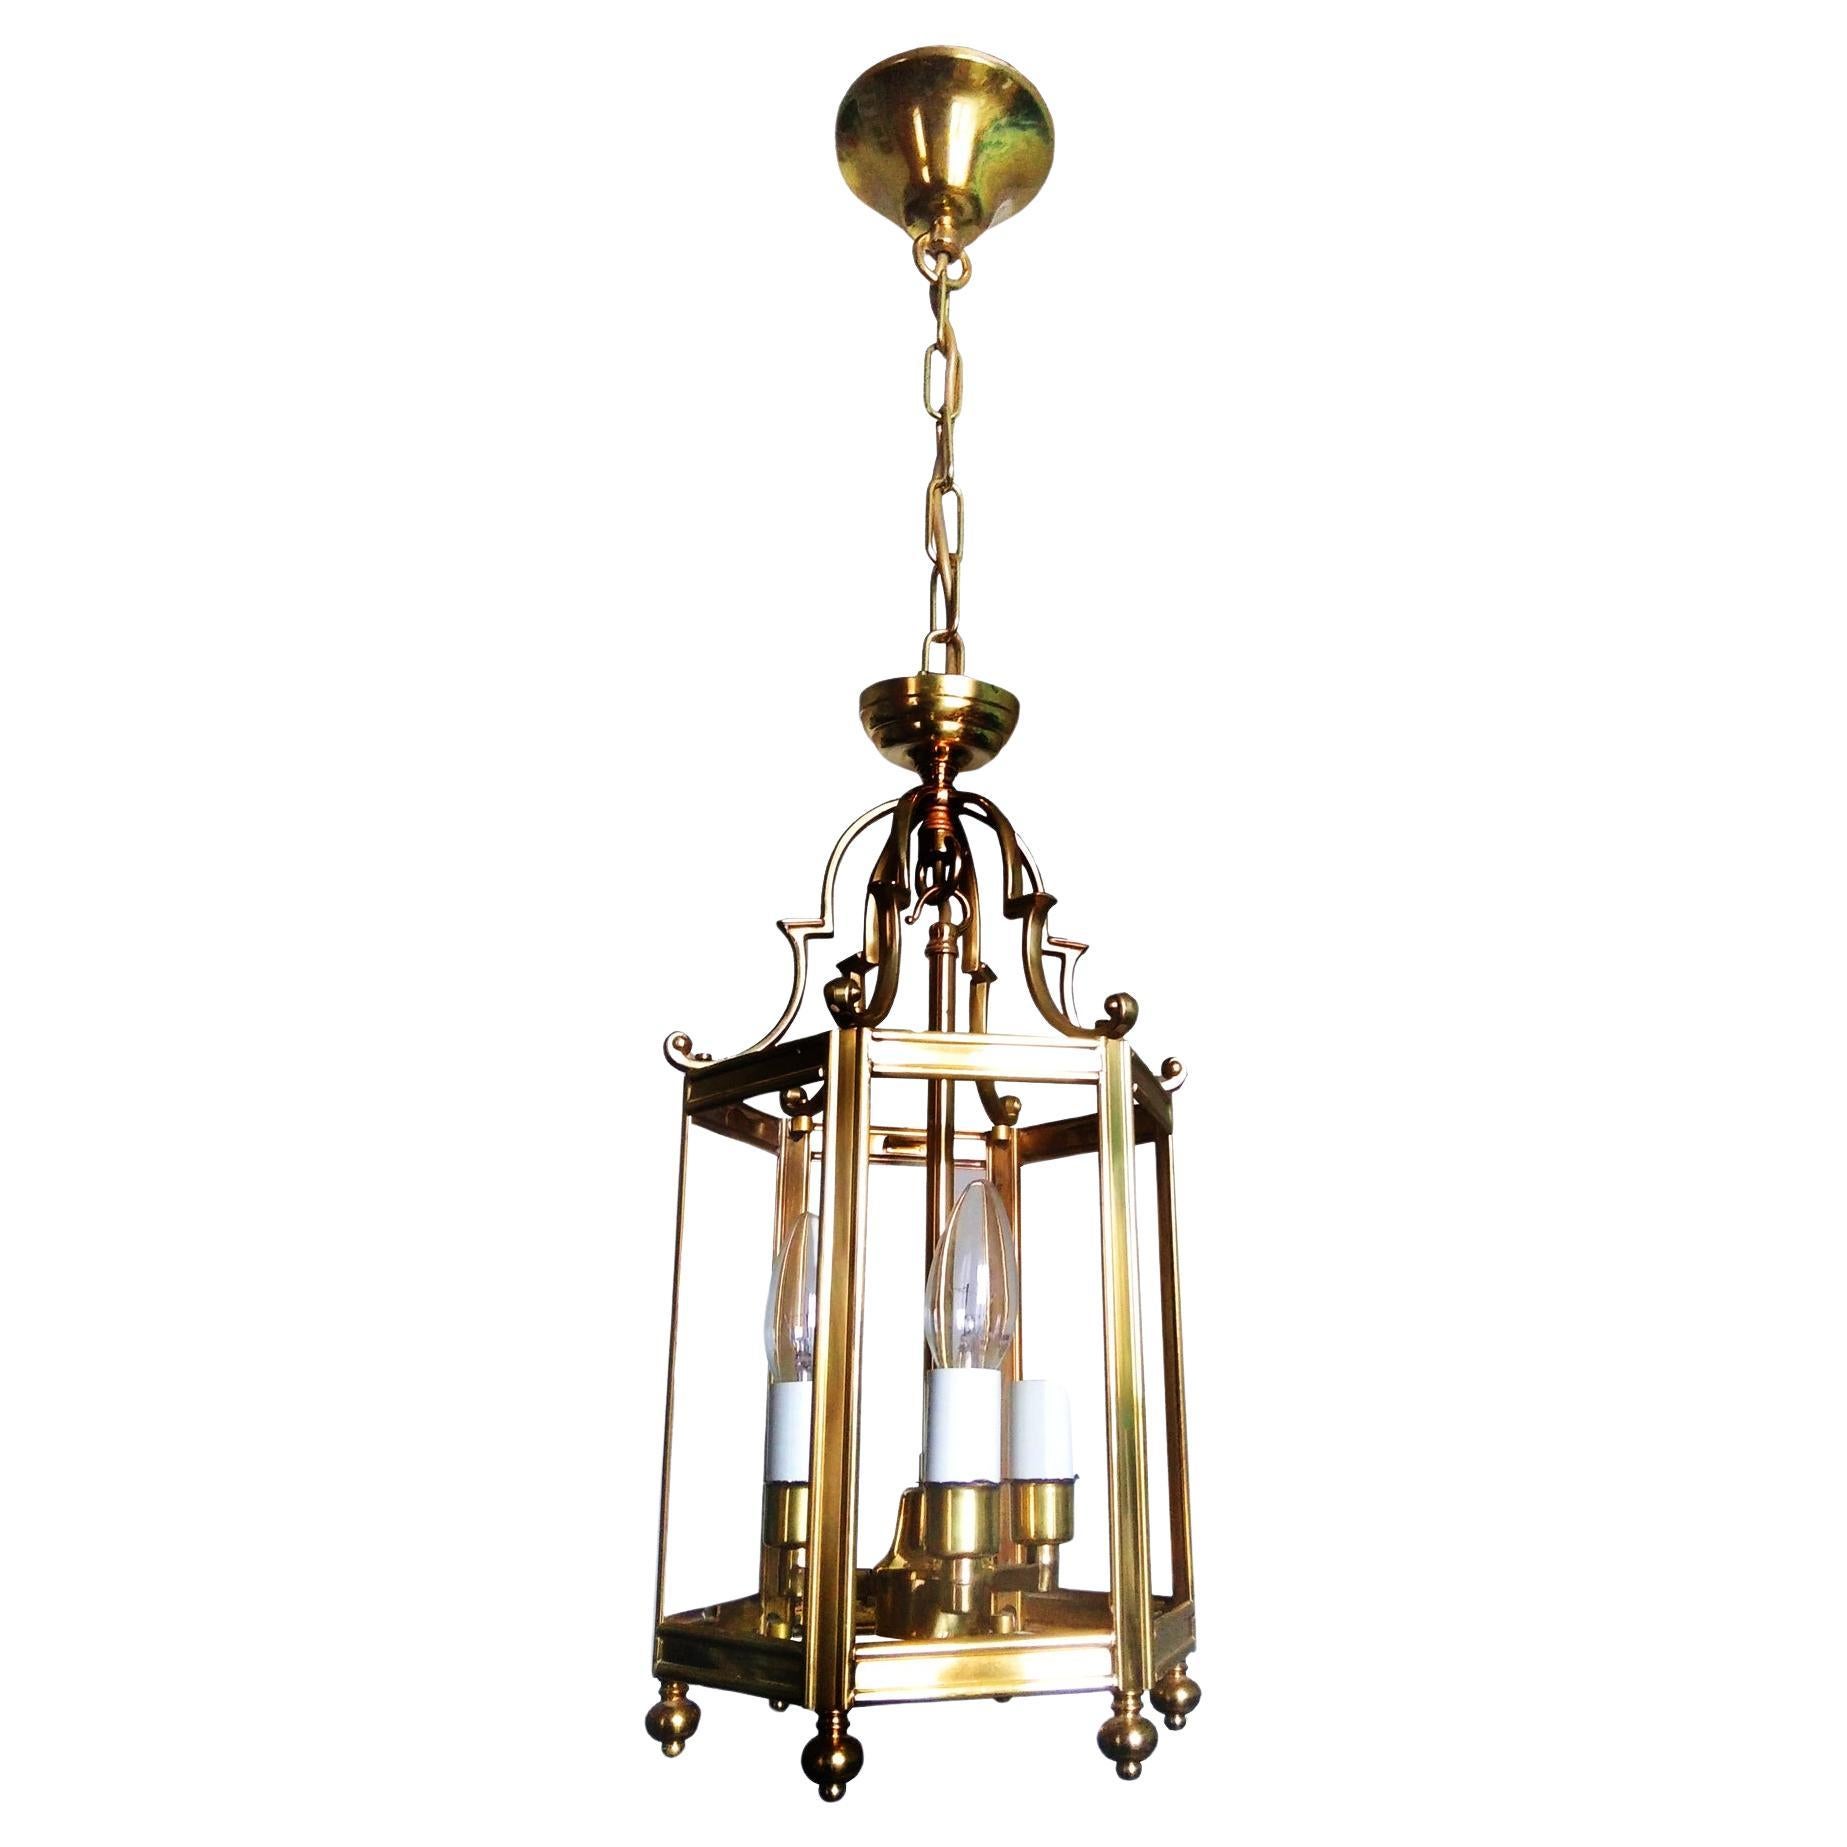 Lantern Brass Glod Lighting from the Mid 20th Century, France For Sale